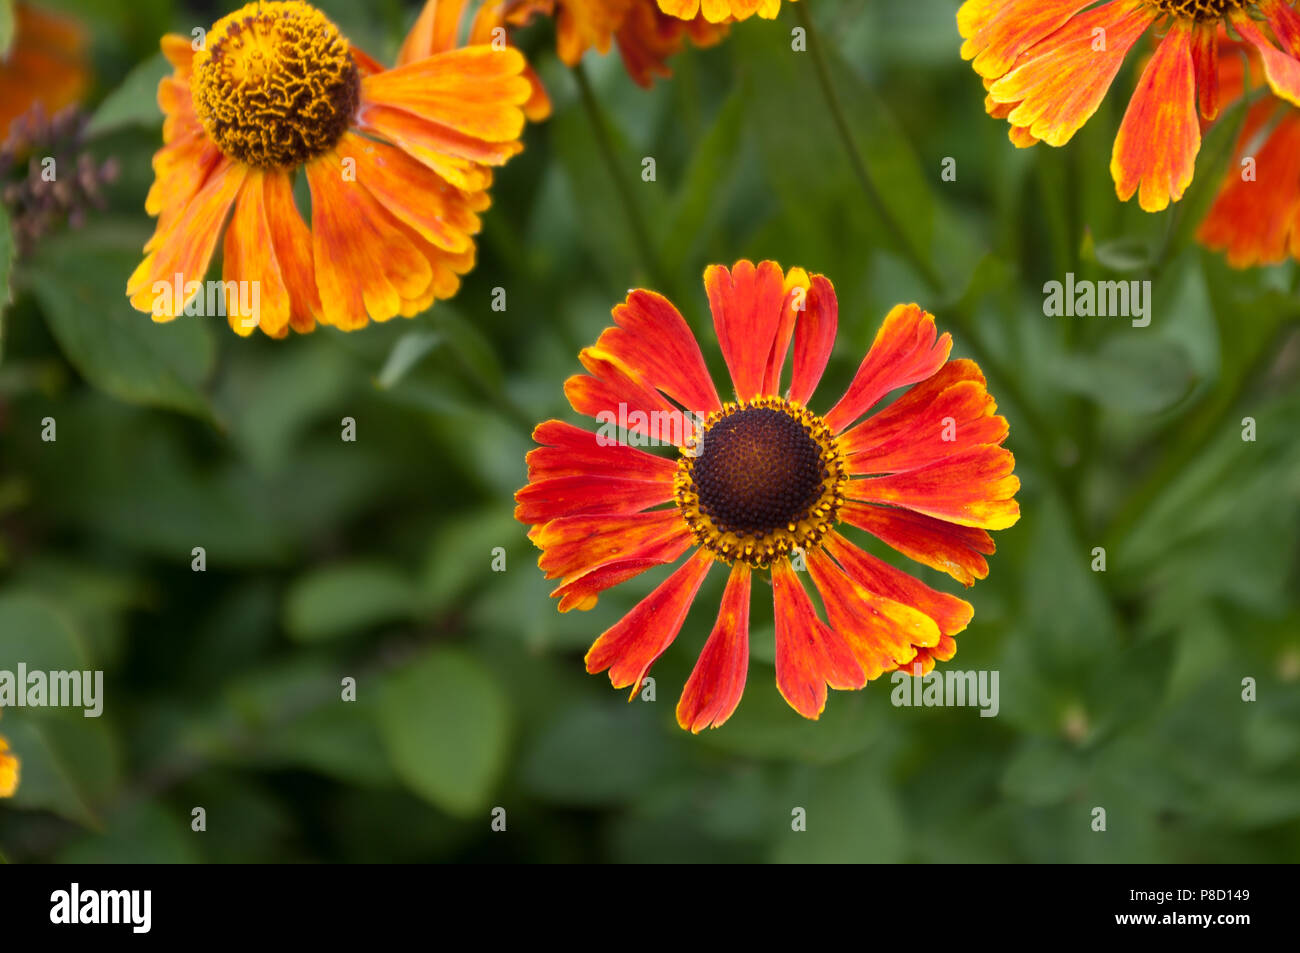 Red orange Helenium Waltraut flower fully open with others at top border. Bokeh background. Stock Photo